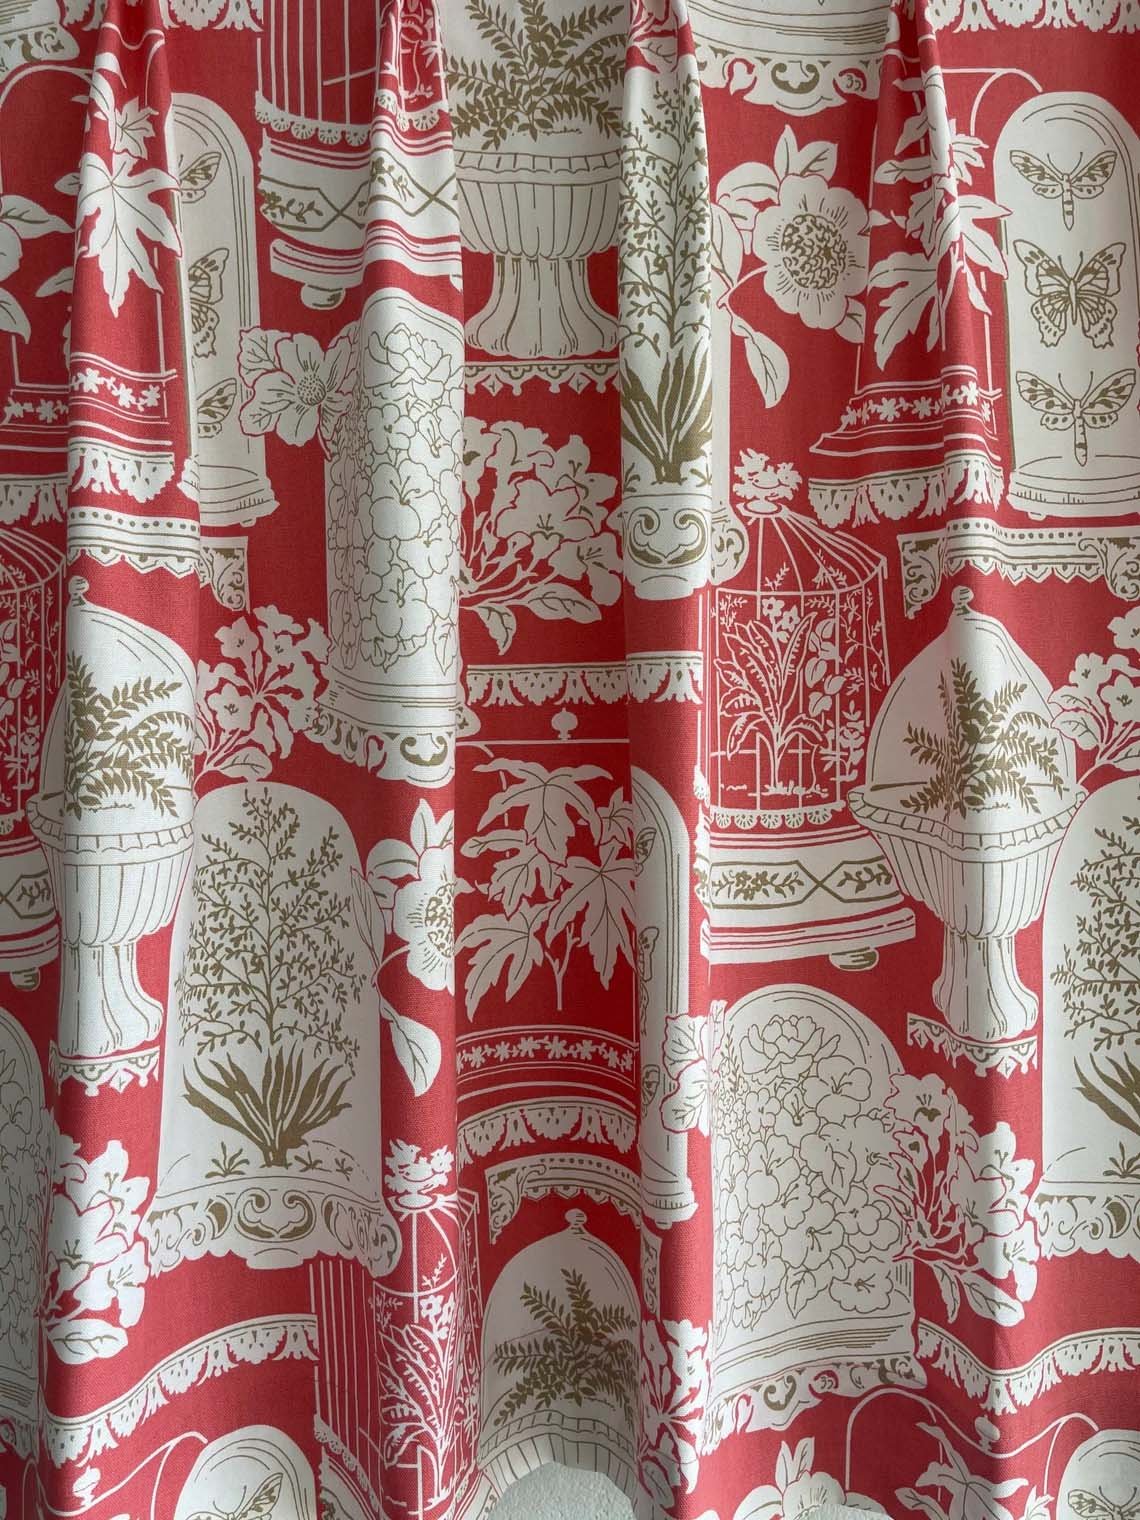 Designer Fabric Lee Jofa Coral pink print floral toile jar fern butterfly jar chinoiserie Curtain Panel designer fabric Window treatment2